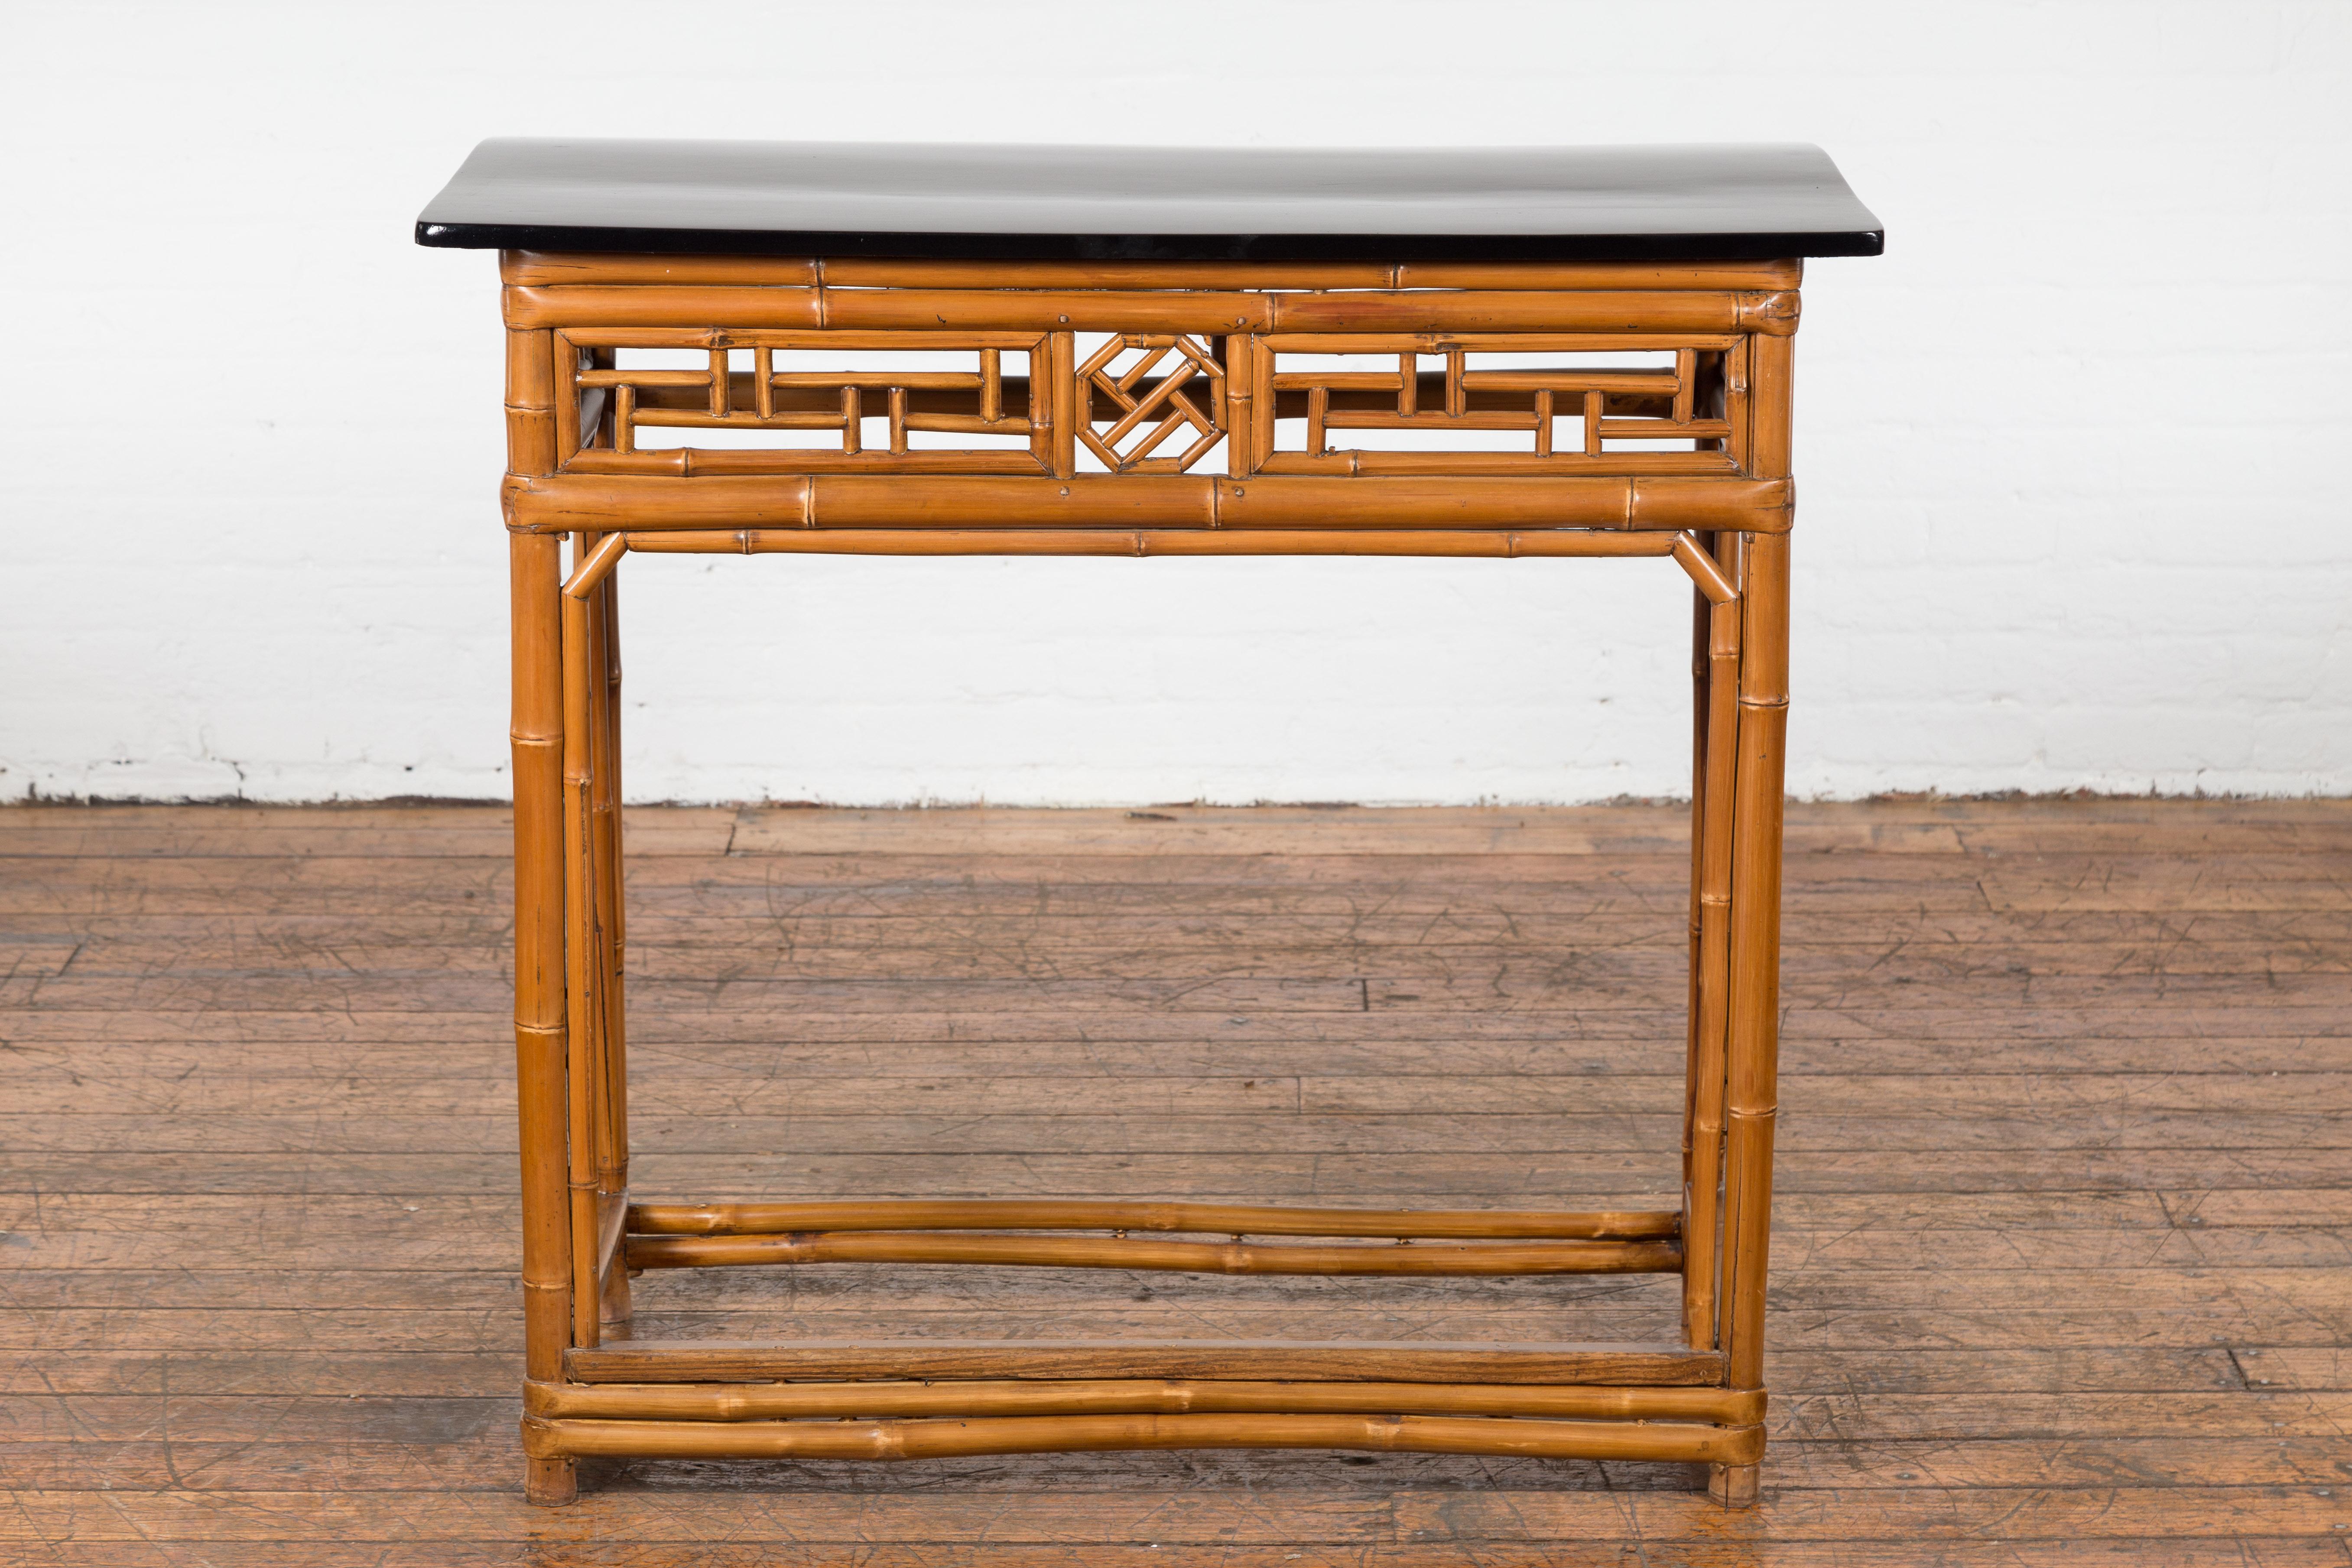 A Chinese late Qing Dynasty period bamboo console table from the early 20th century with black lacquered top, geometric apron, four straight legs and side stretchers. This Chinese late Qing Dynasty period bamboo console table from the early 20th